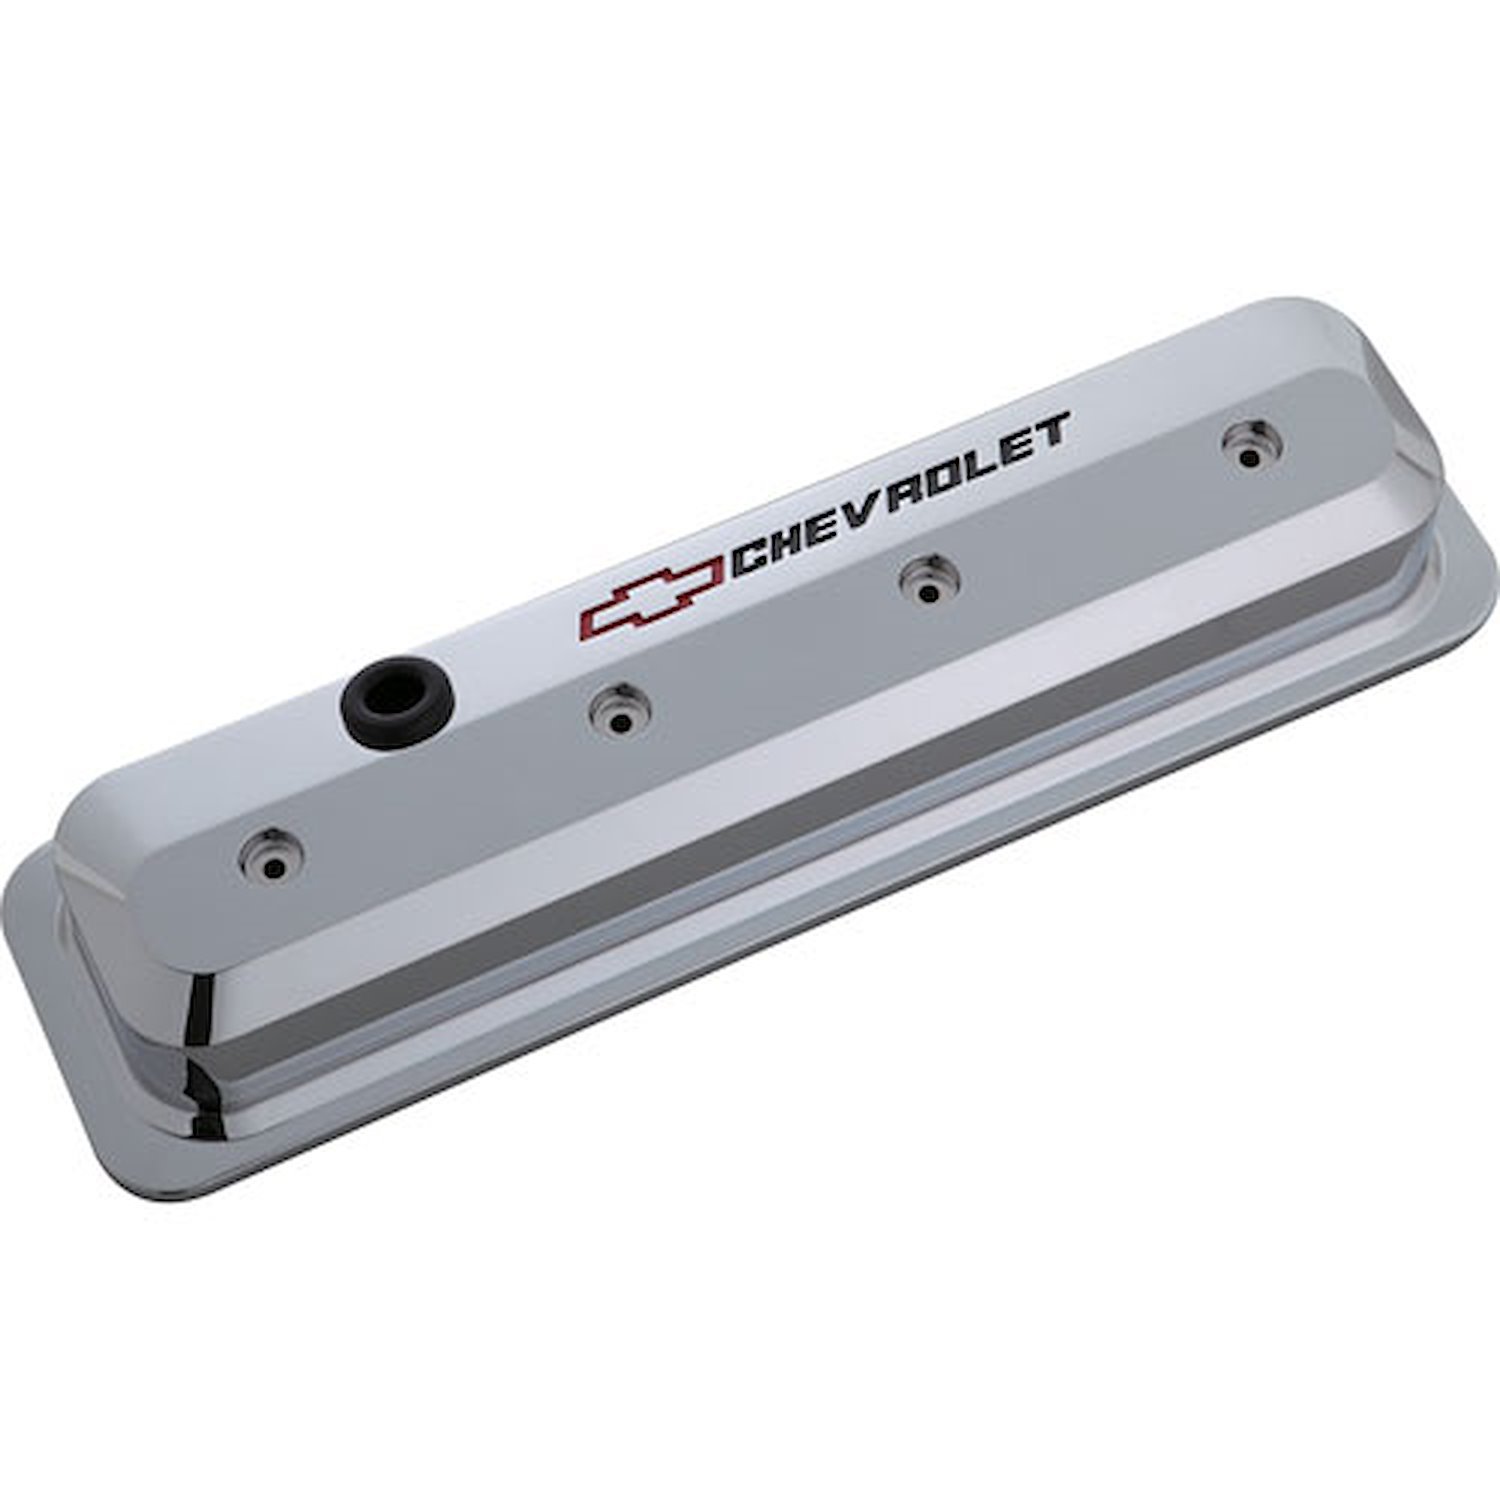 Die-Cast Slant-Edge Valve Covers for 1987-Up Small Block Chevy with Chevrolet/Bowtie Recessed Emblem in Chrome Finish